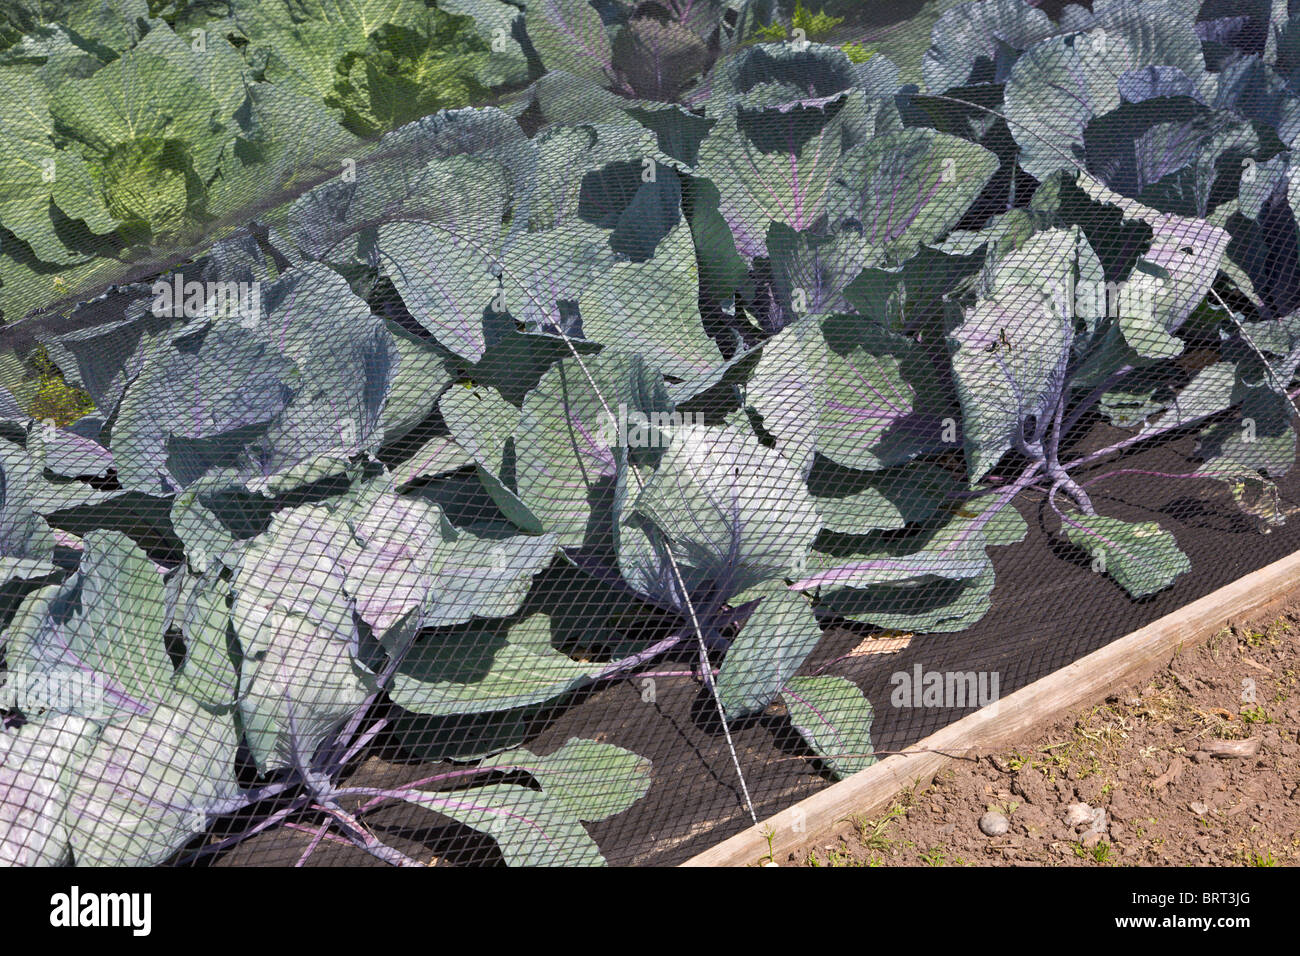 Cabbage netted for protection against pests Stock Photo